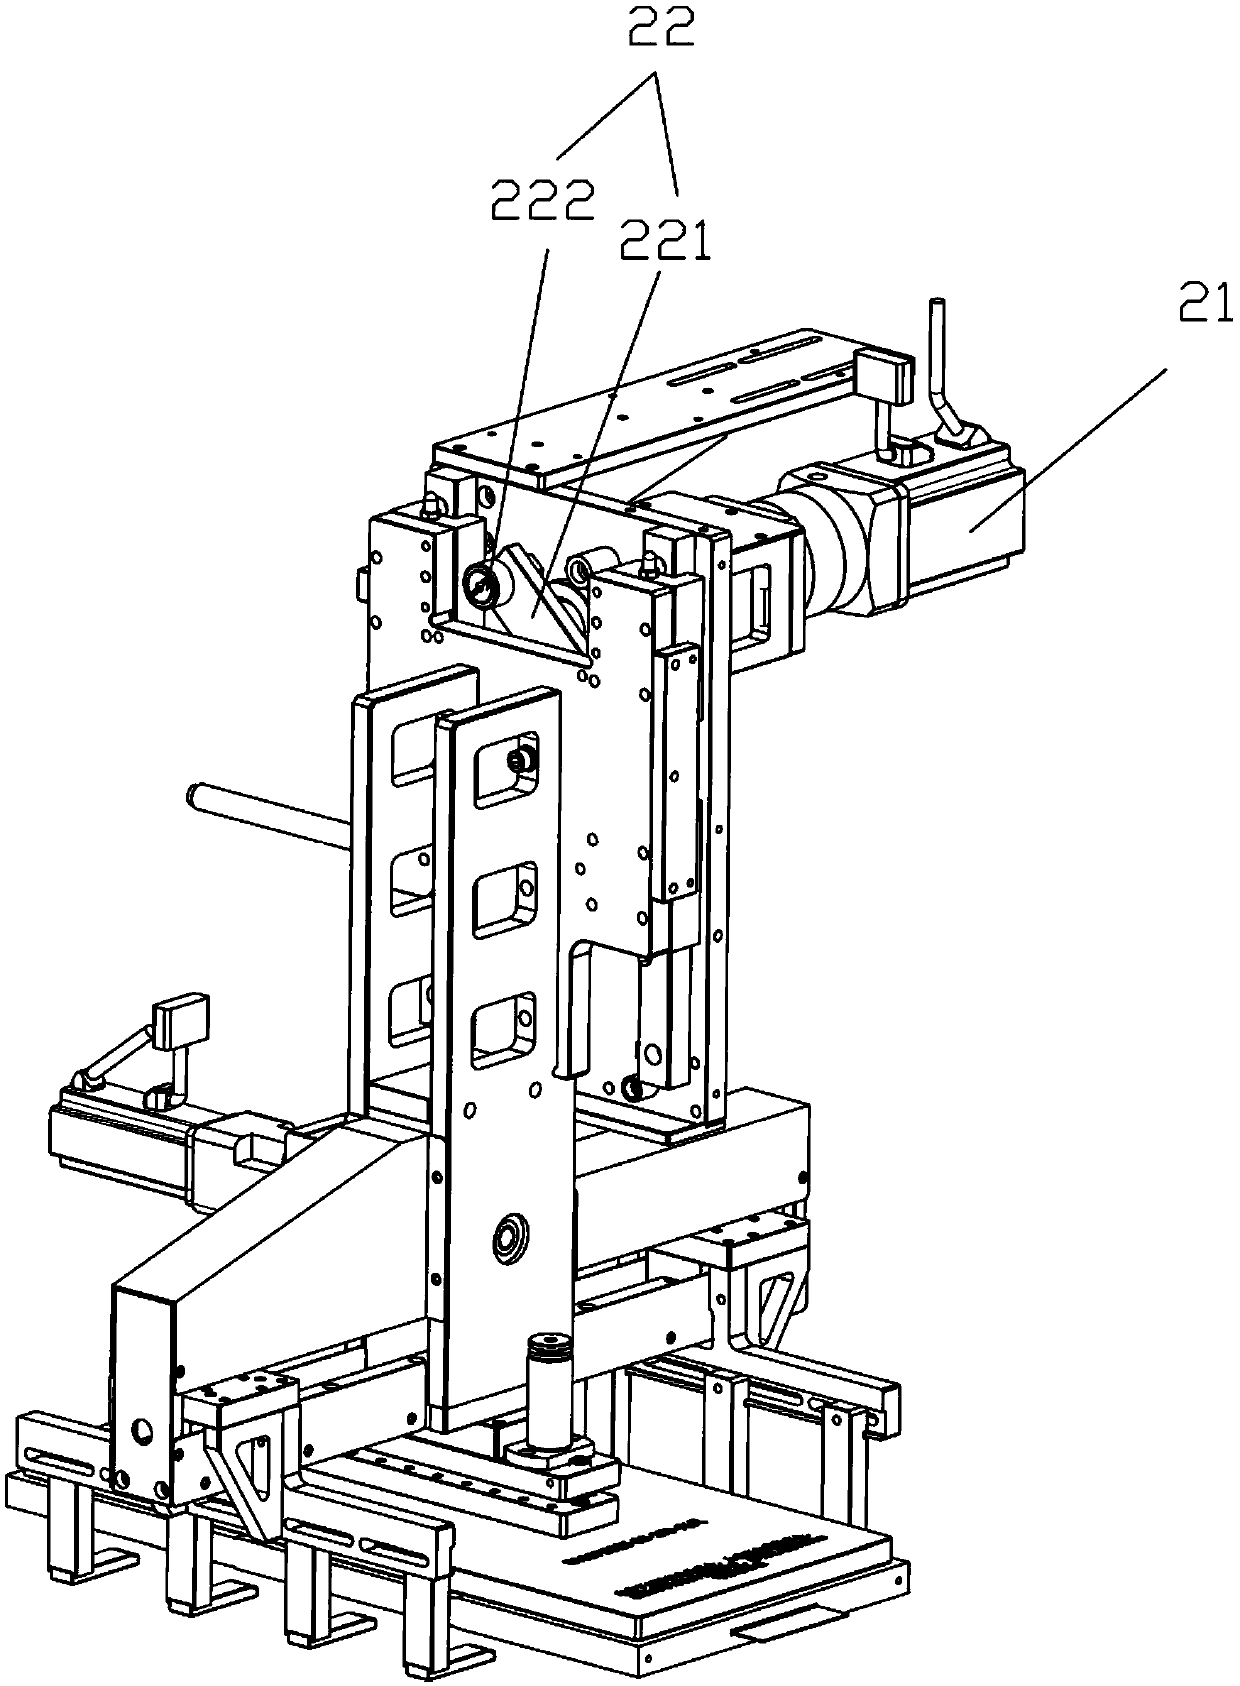 Clamping robot structure